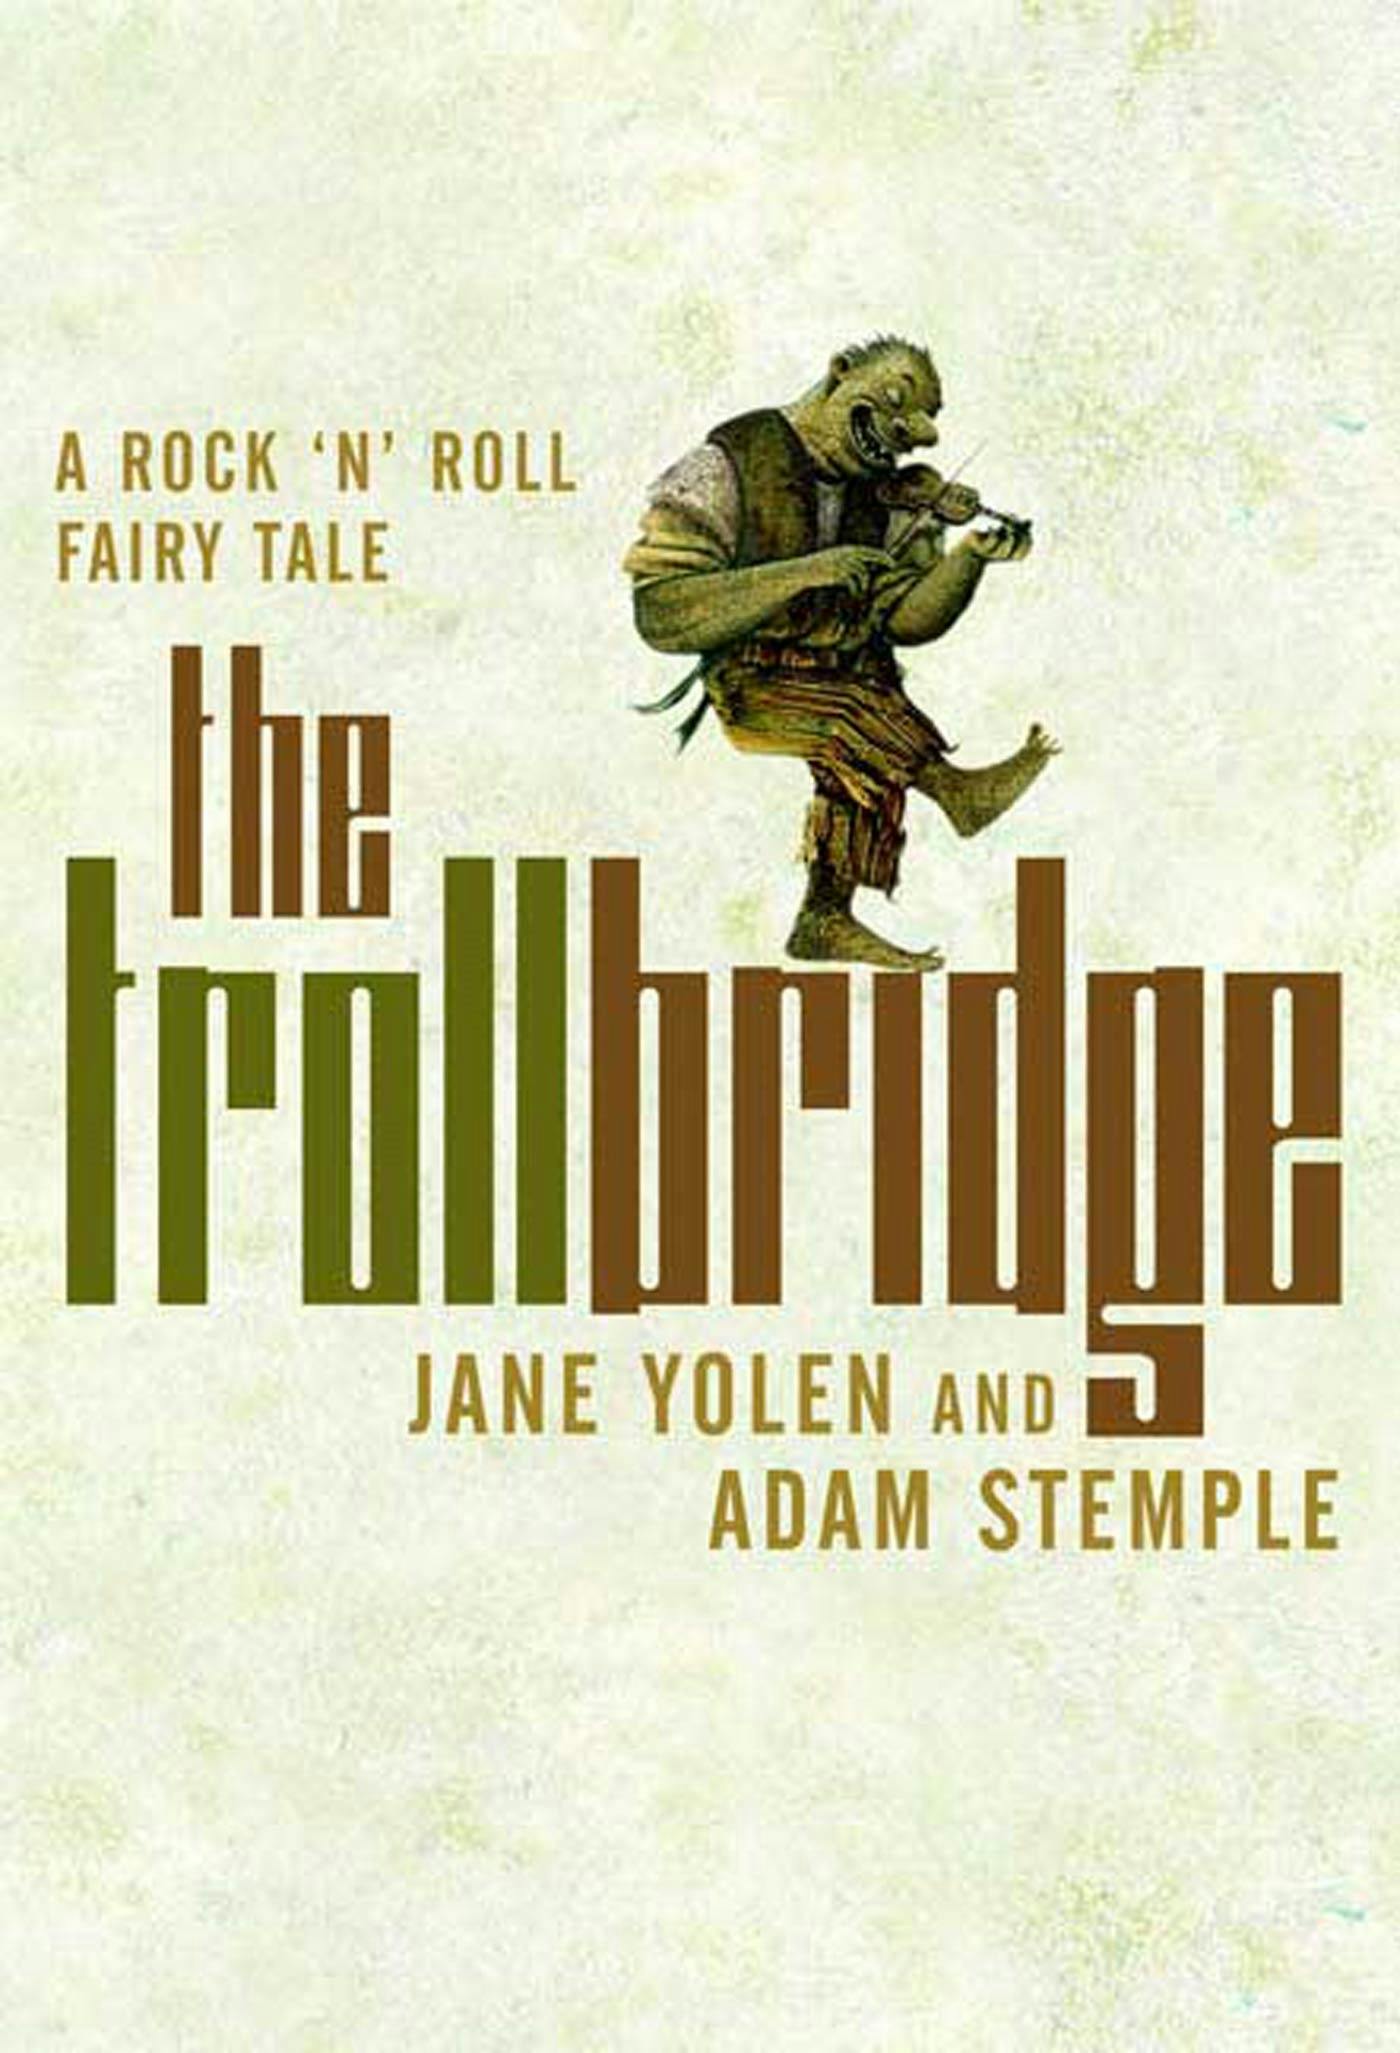 Cover for the book titled as: Troll Bridge